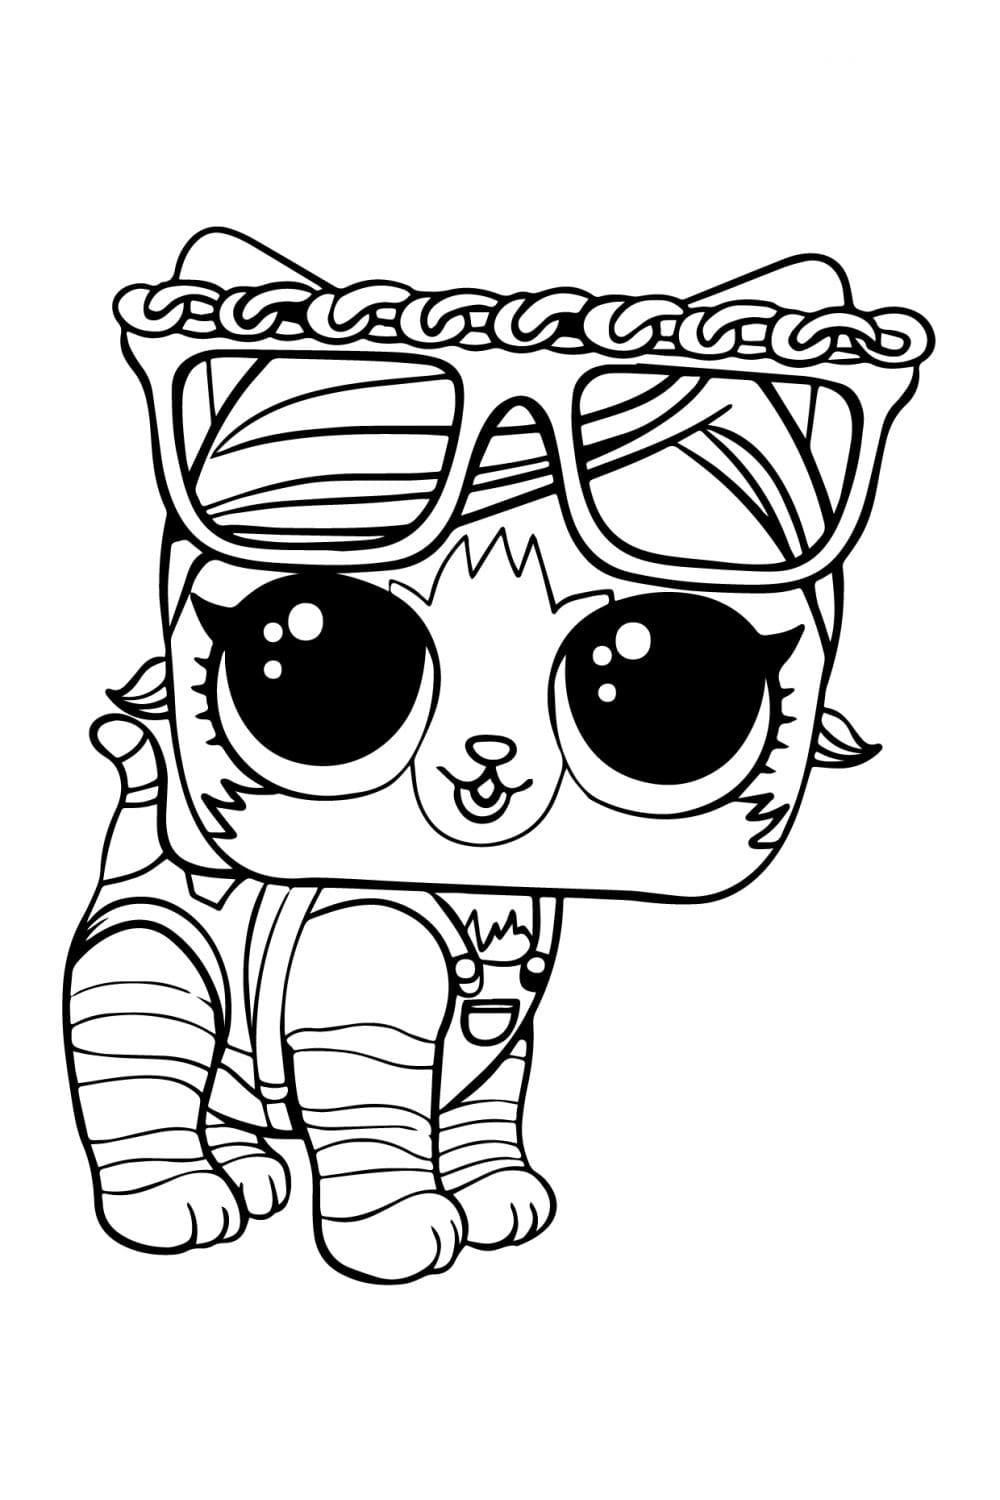 puppy and kitten coloring pages